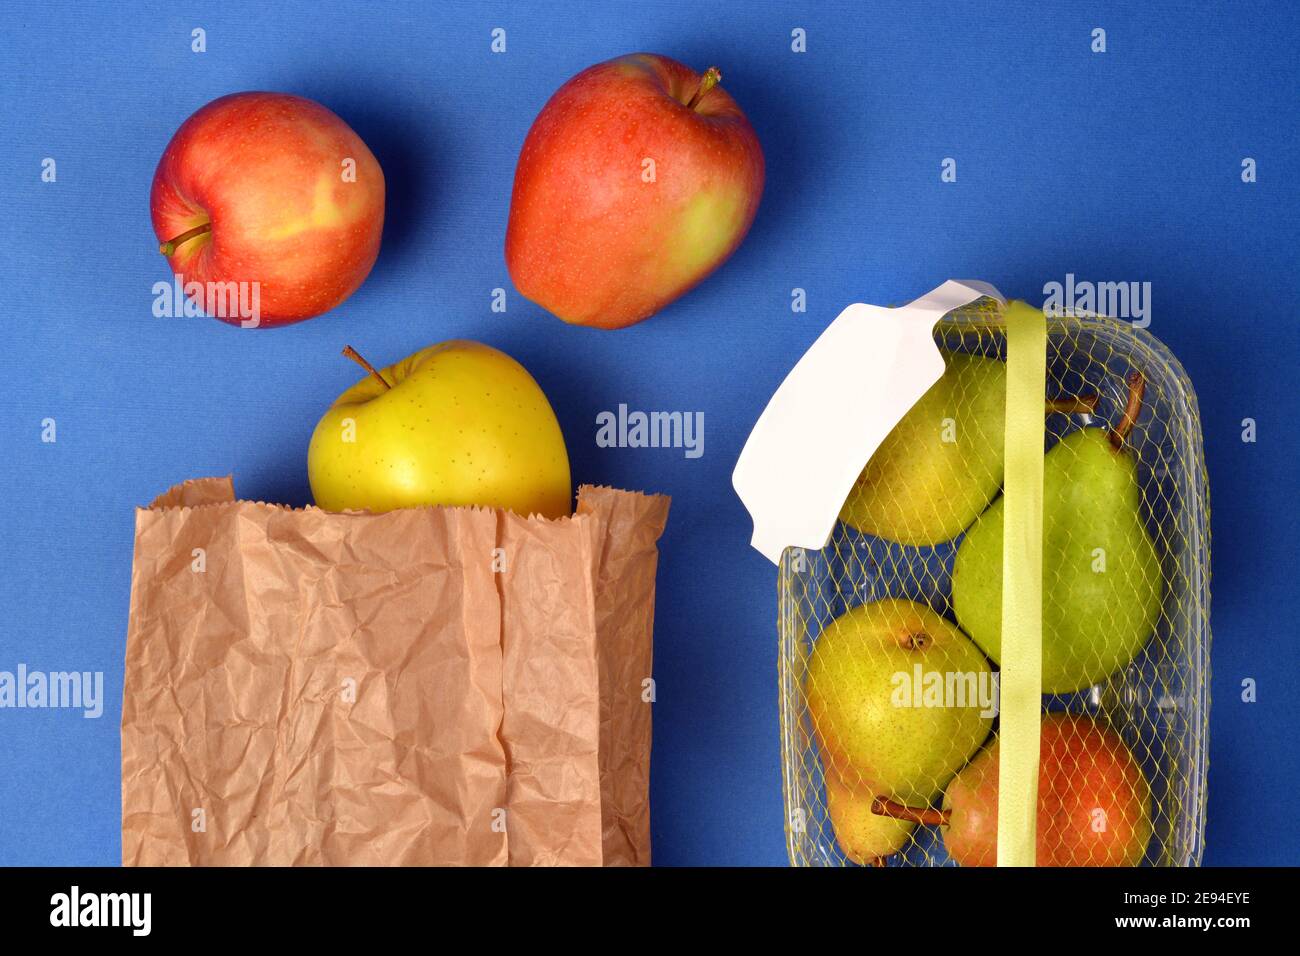 Detail of fruit purchased in plastic packaging and in paper bags Stock Photo